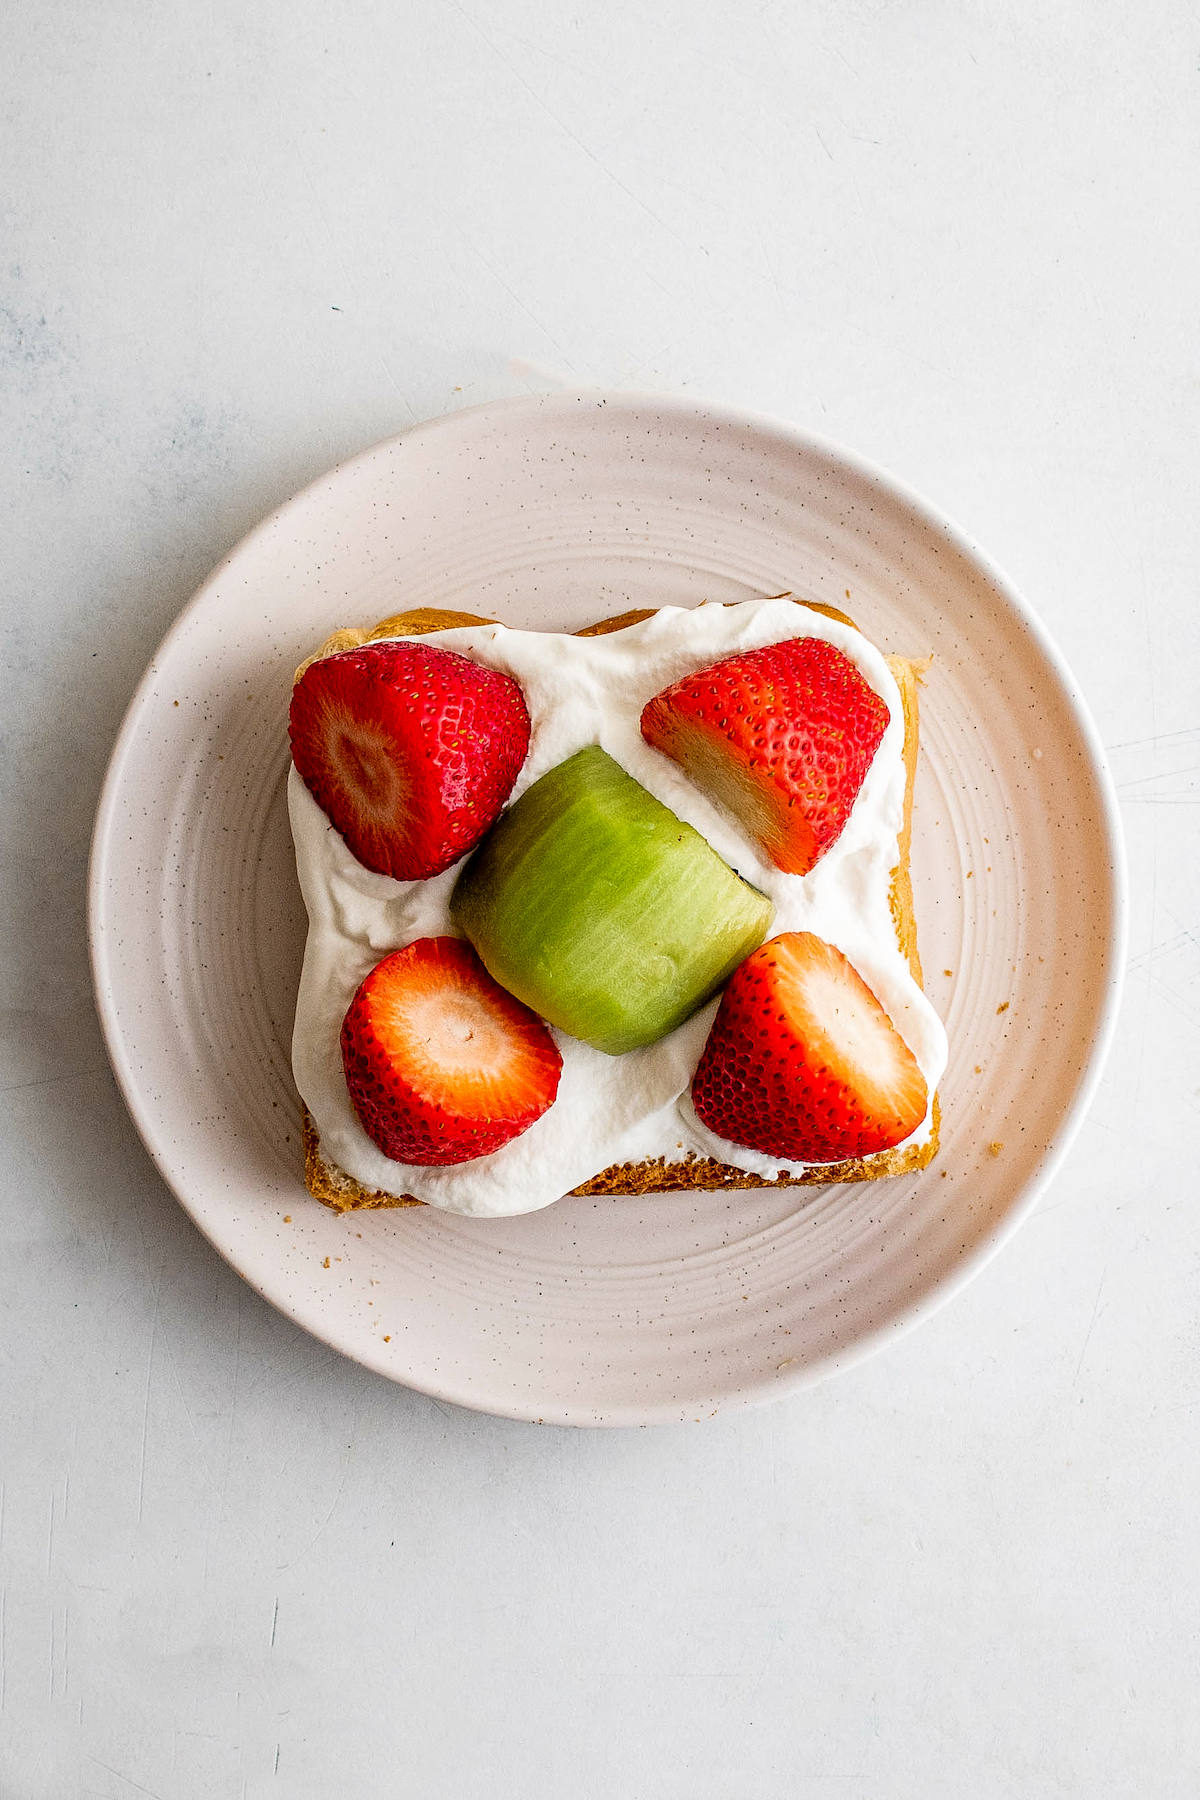 A slice of bread covered in whipped cream, with fruit arranged symmetrically on top.